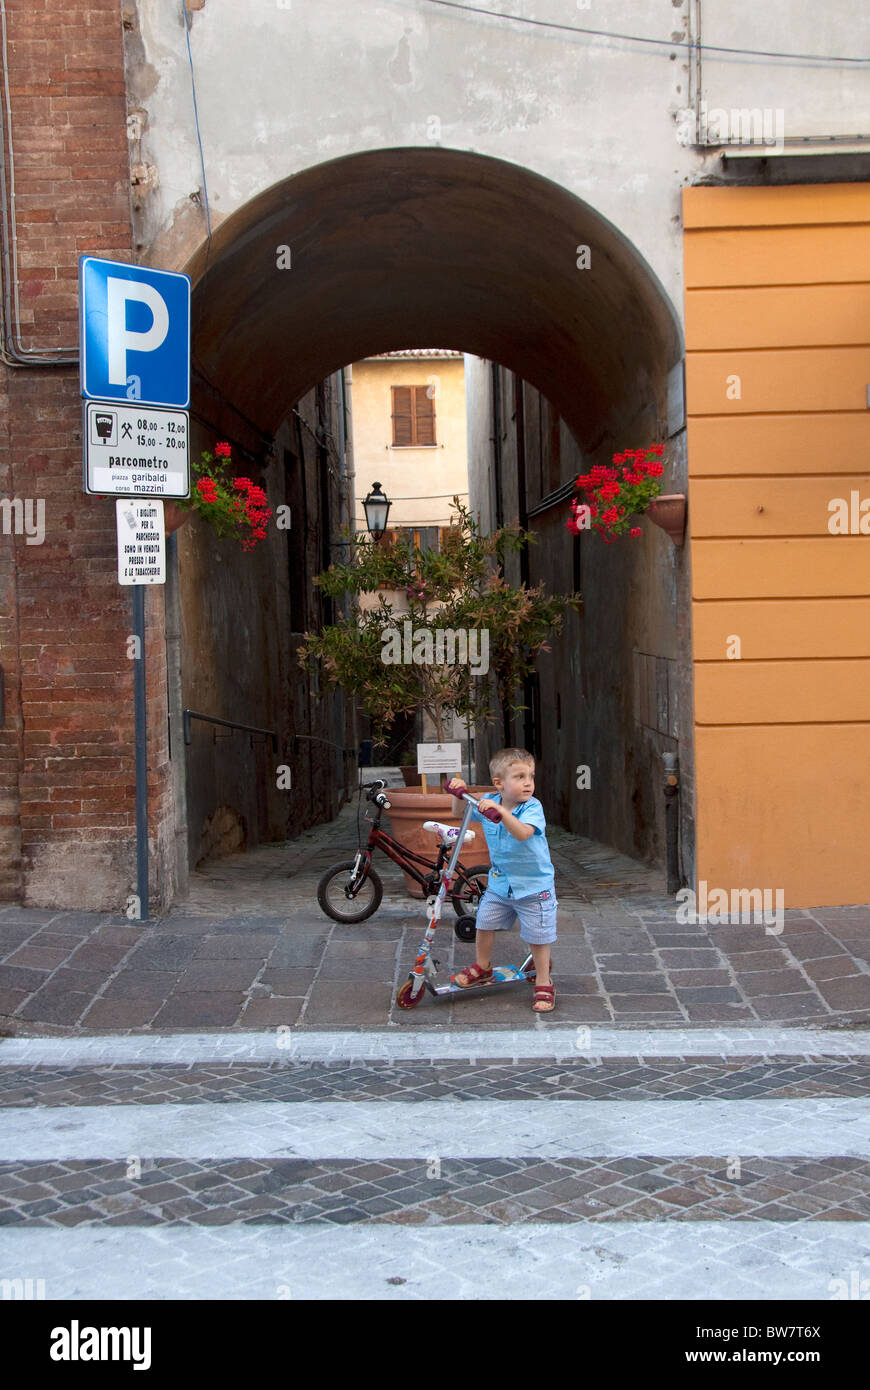 Child on a bicycle in Arcevia, Le Marche, Italy Stock Photo